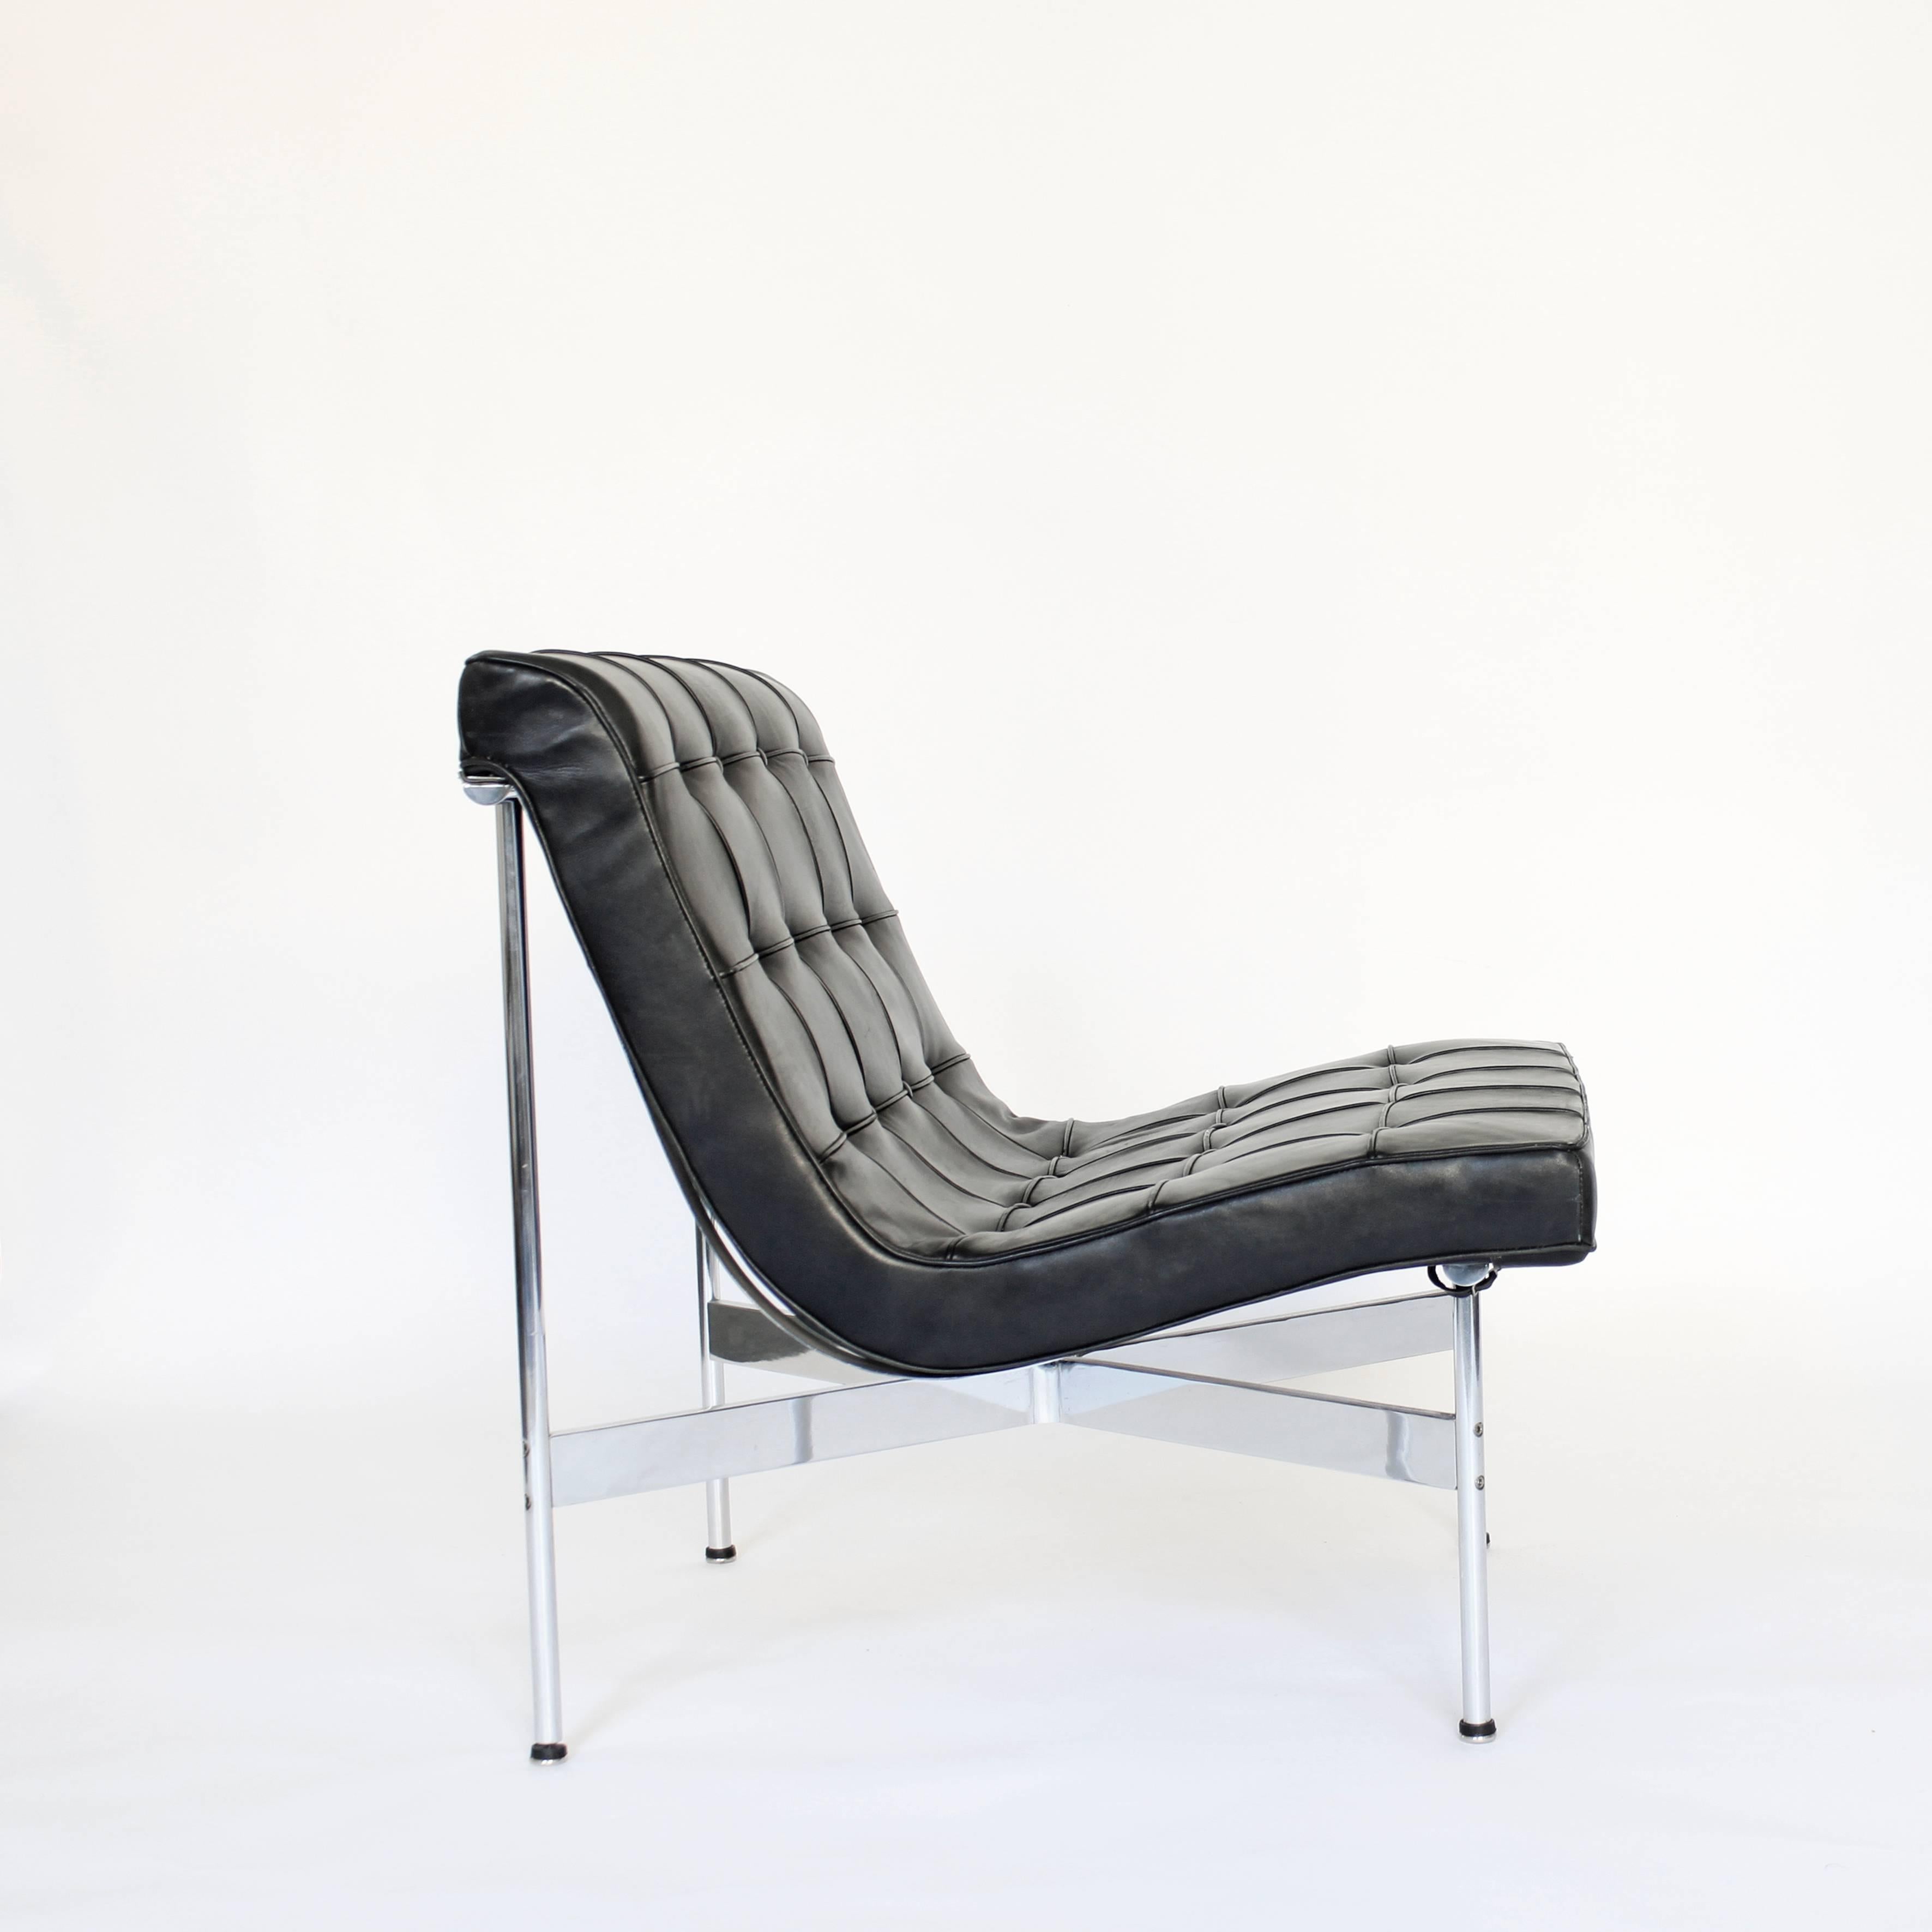 The New York chair designed by the American trio William Katavolos, Ross Littell and Douglas Kelley for Laverne International. Chrome-plated steel frame and original black leather upholstery.